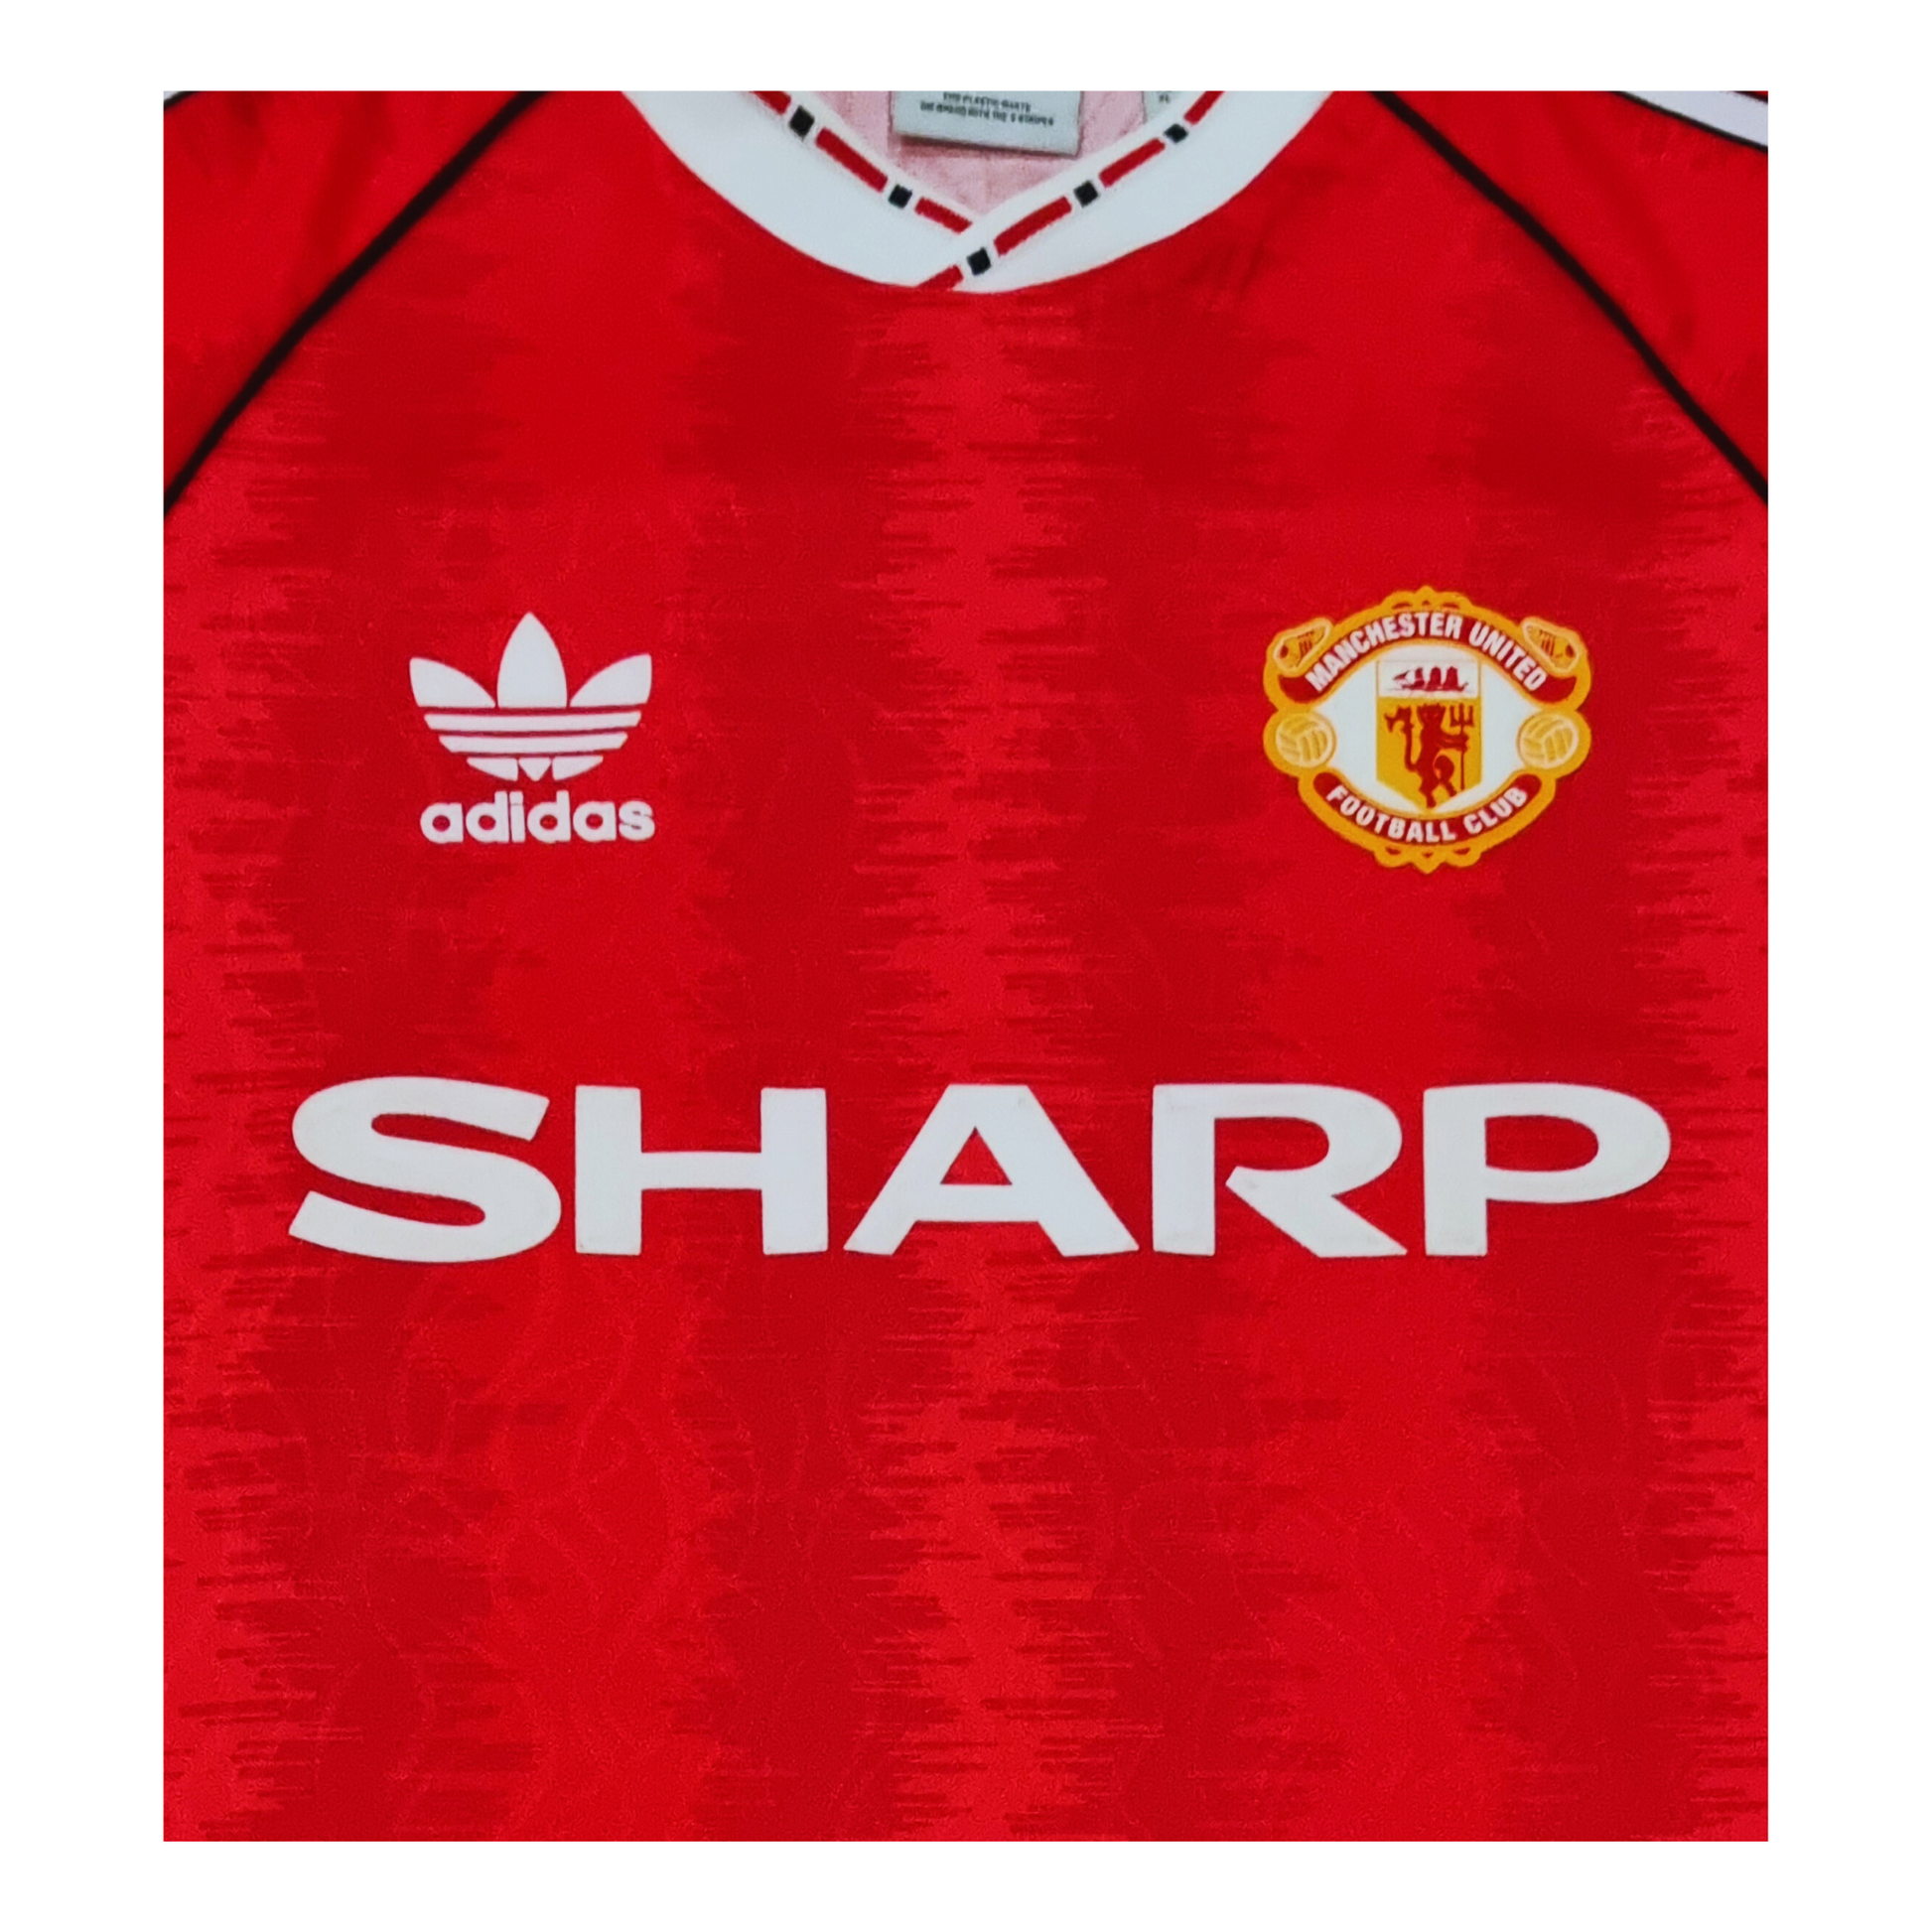 An Adidas Manchester United 1991/92 Home Jersey Re-release with the word sharp on it.